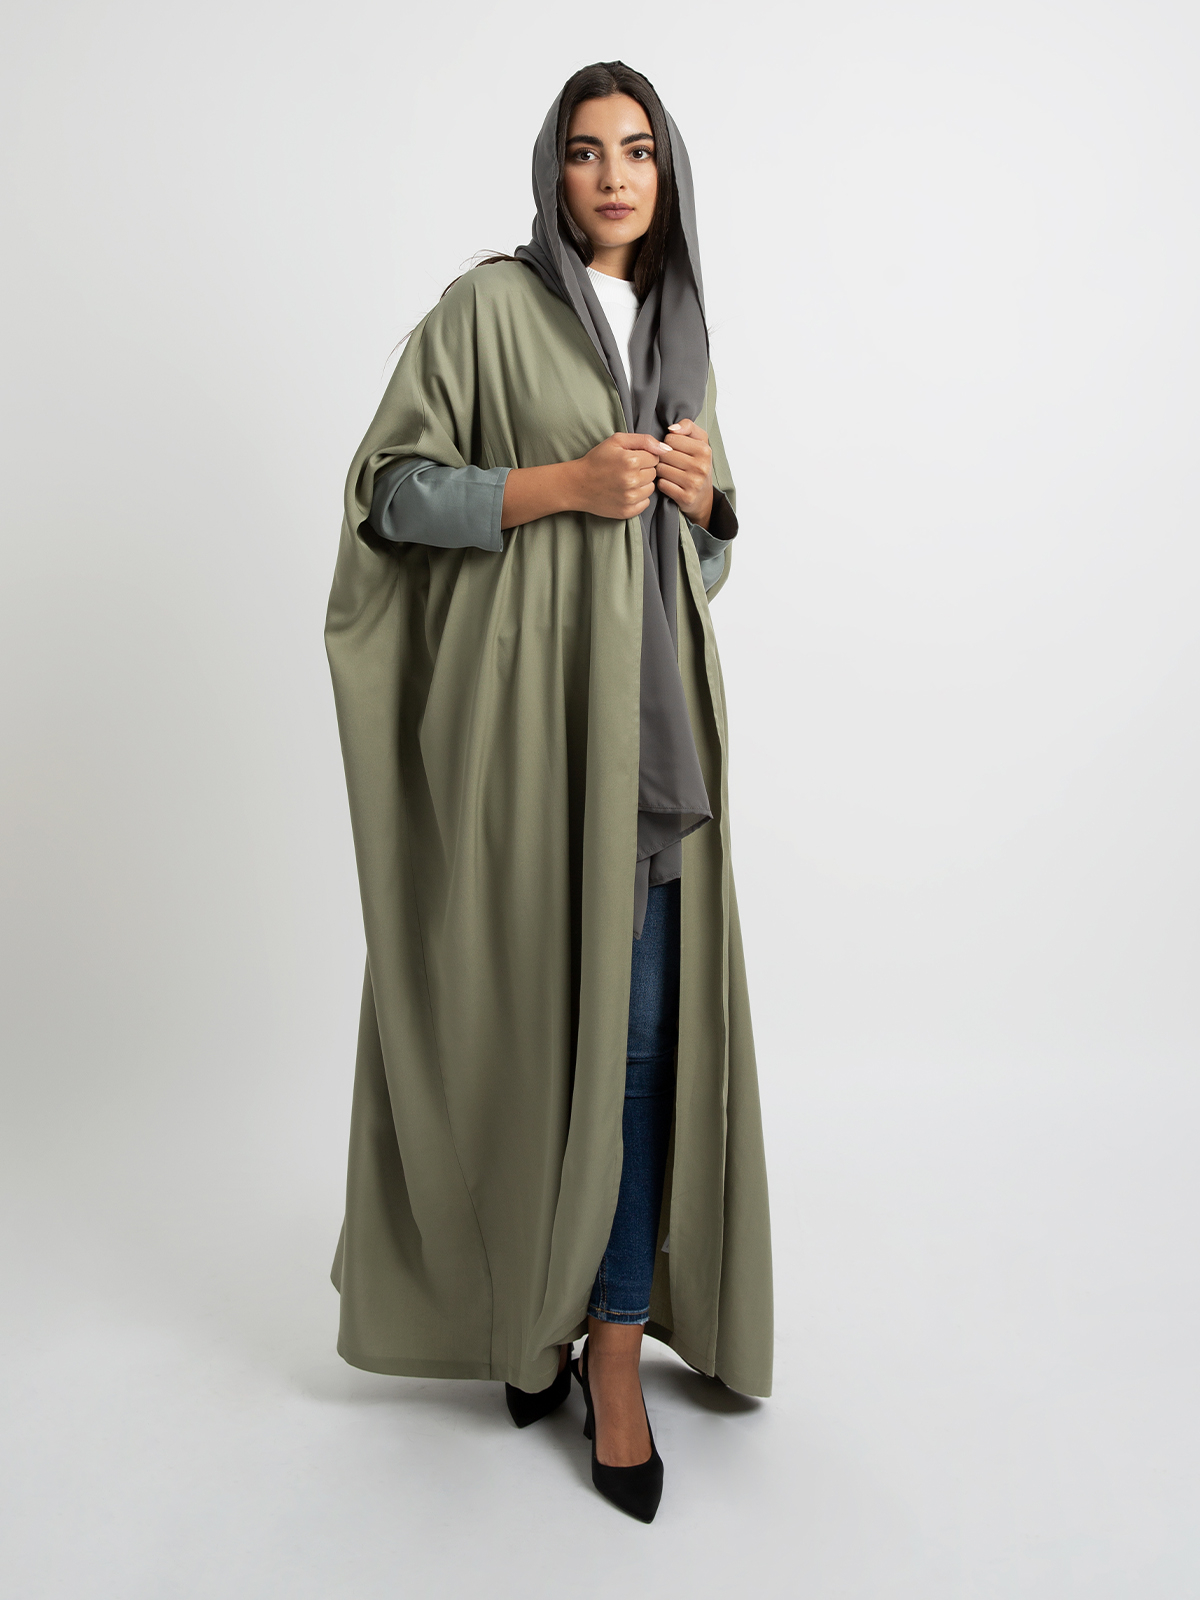 Kaafmeem women clothing 2 color green and blue butterfly wide cut long elegant abaya in lyocell fabric for outings